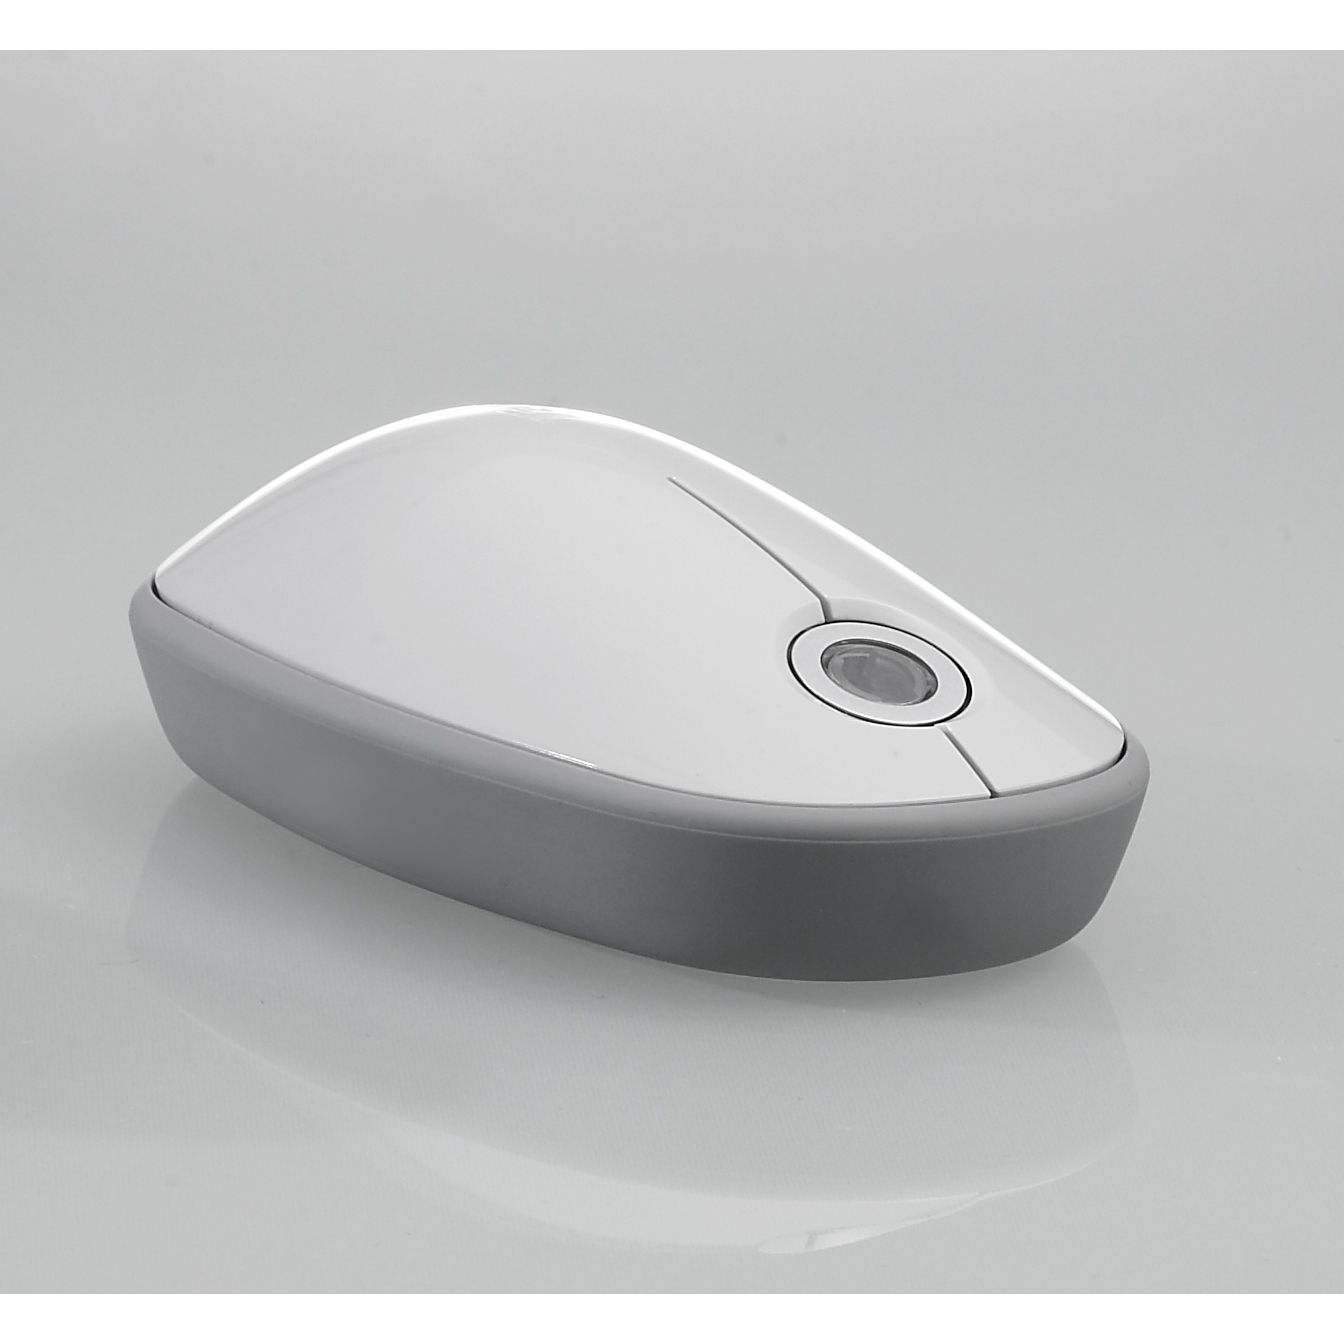 Bluetooth Mouse For Mac